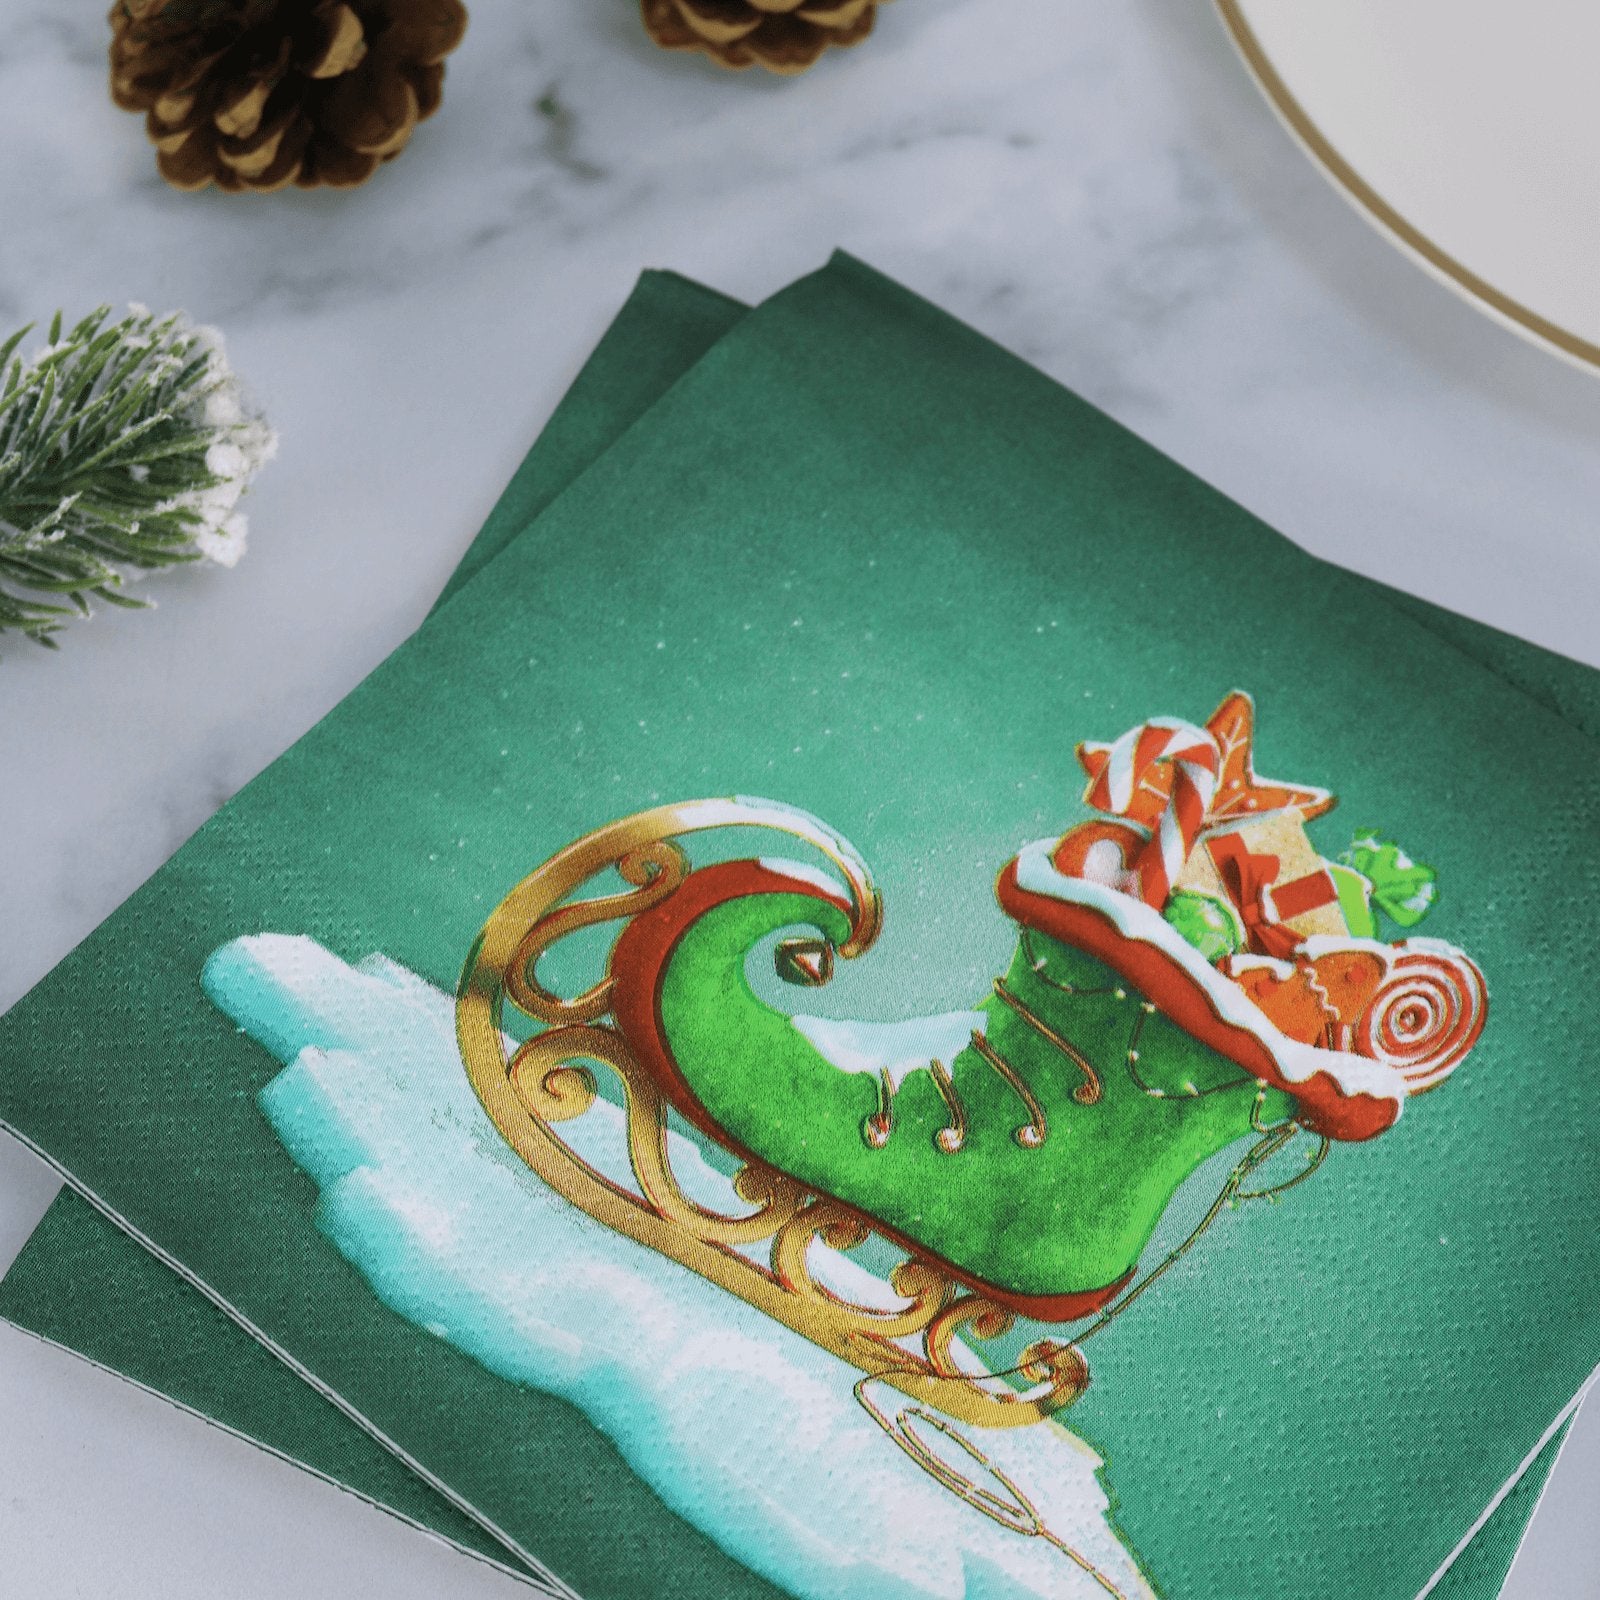 green elf boot napkins on christmas table bside gold trim plate